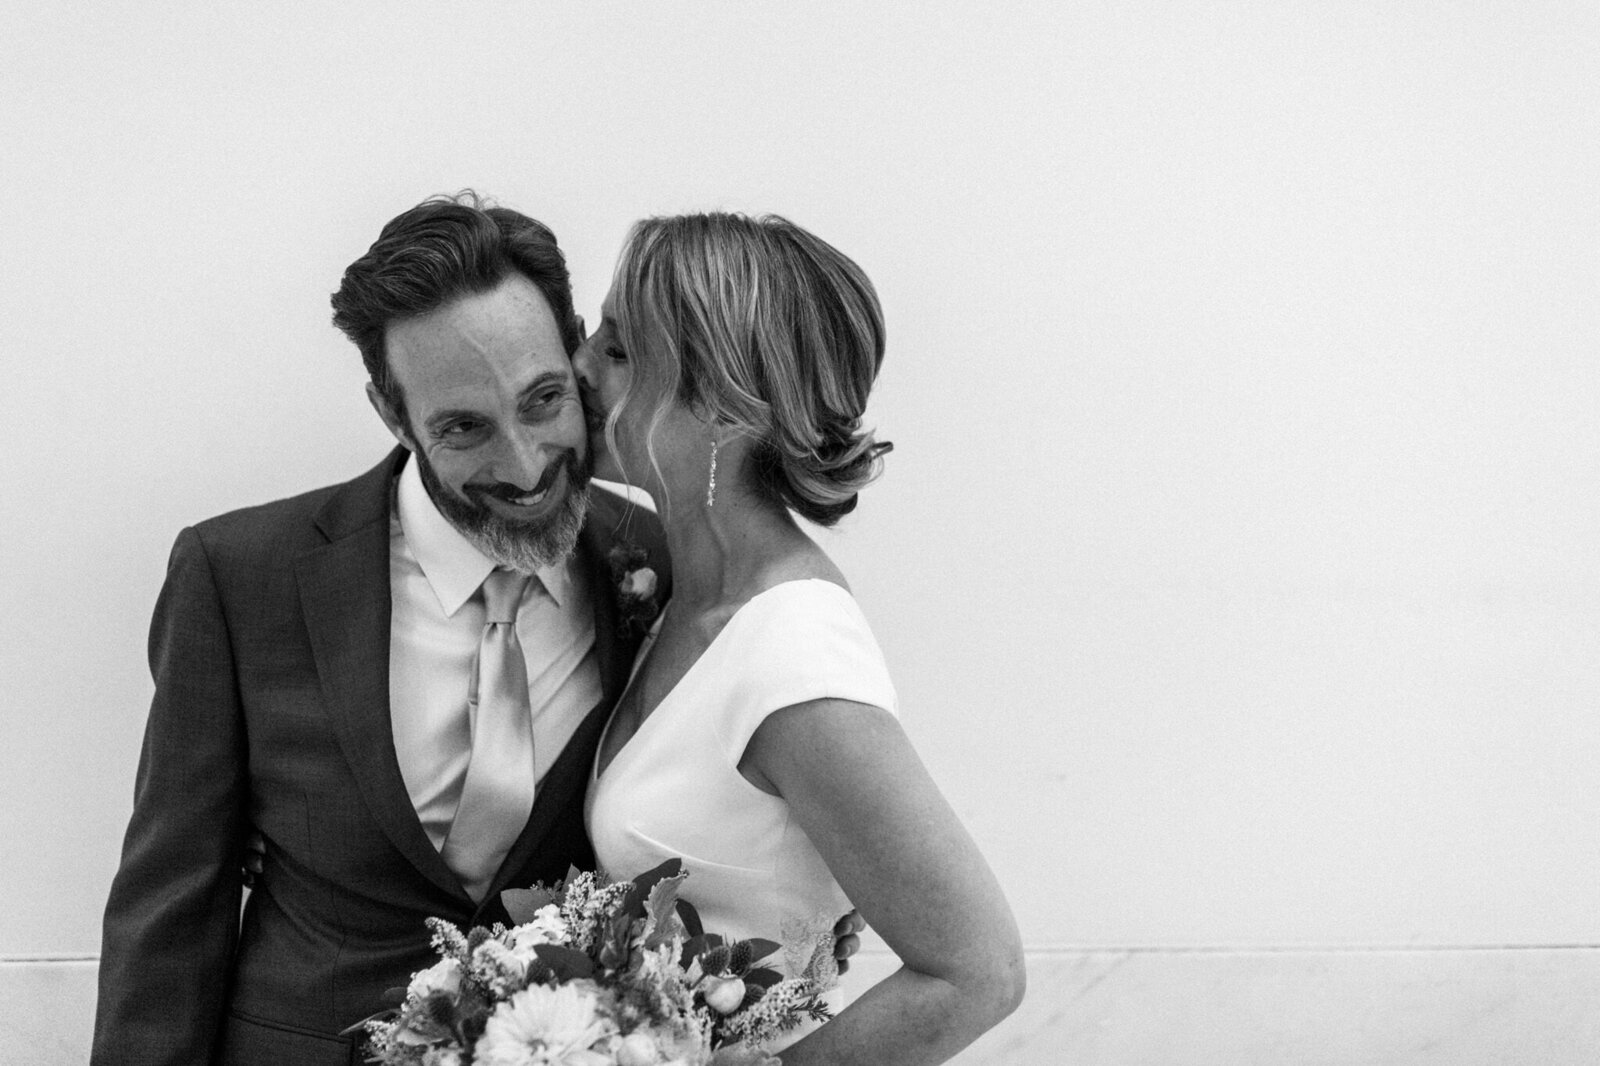 sweet intimate wedding moments captured at sf city hall